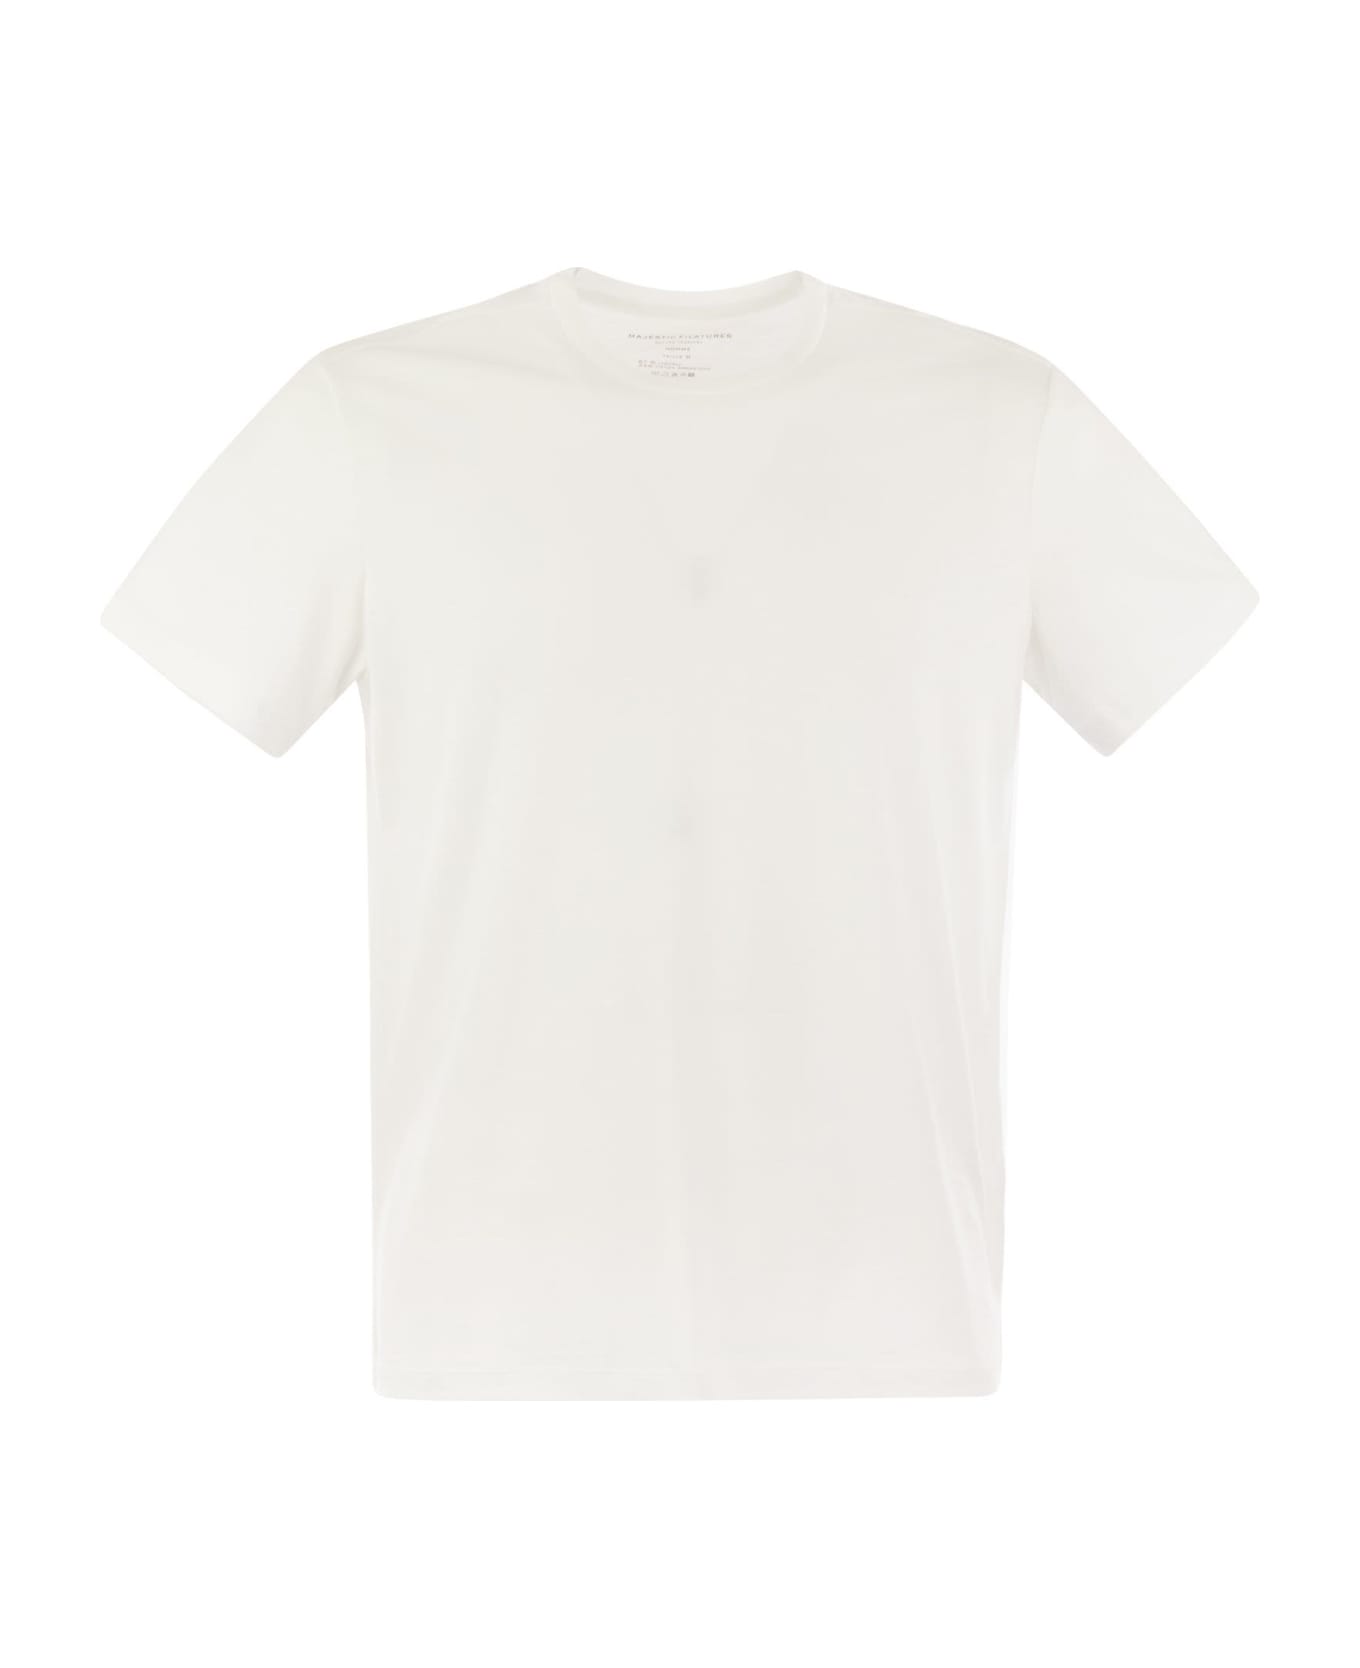 Majestic Filatures Short-sleeved T-shirt In Lyocell And Cotton - White